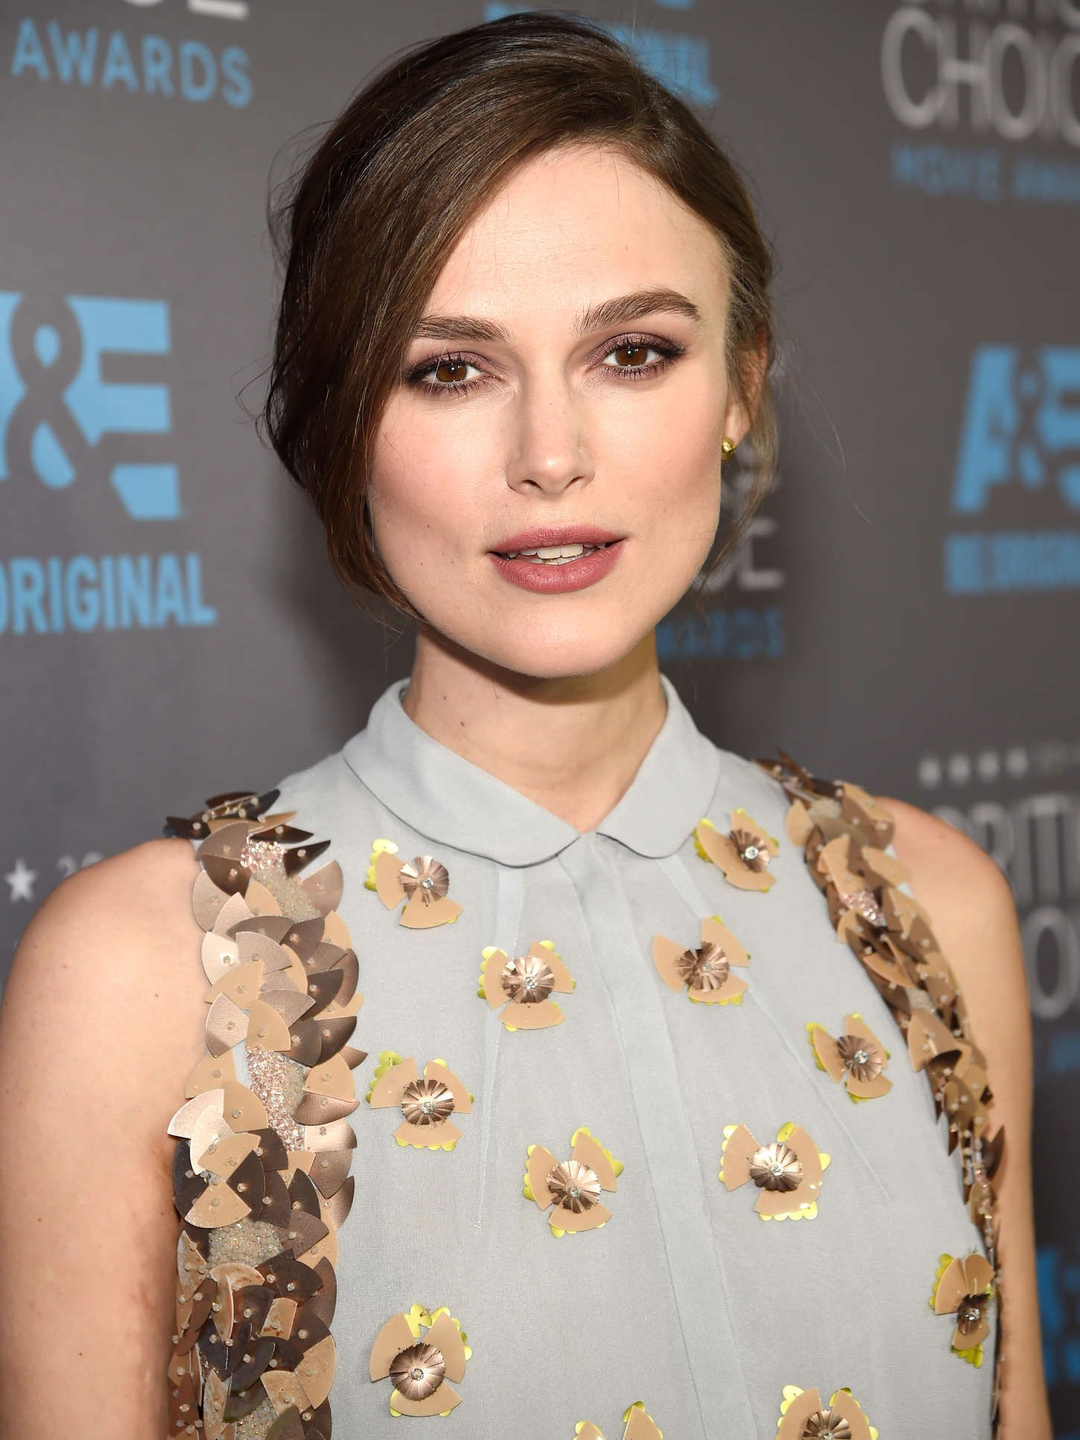 Keira Knightley who is she